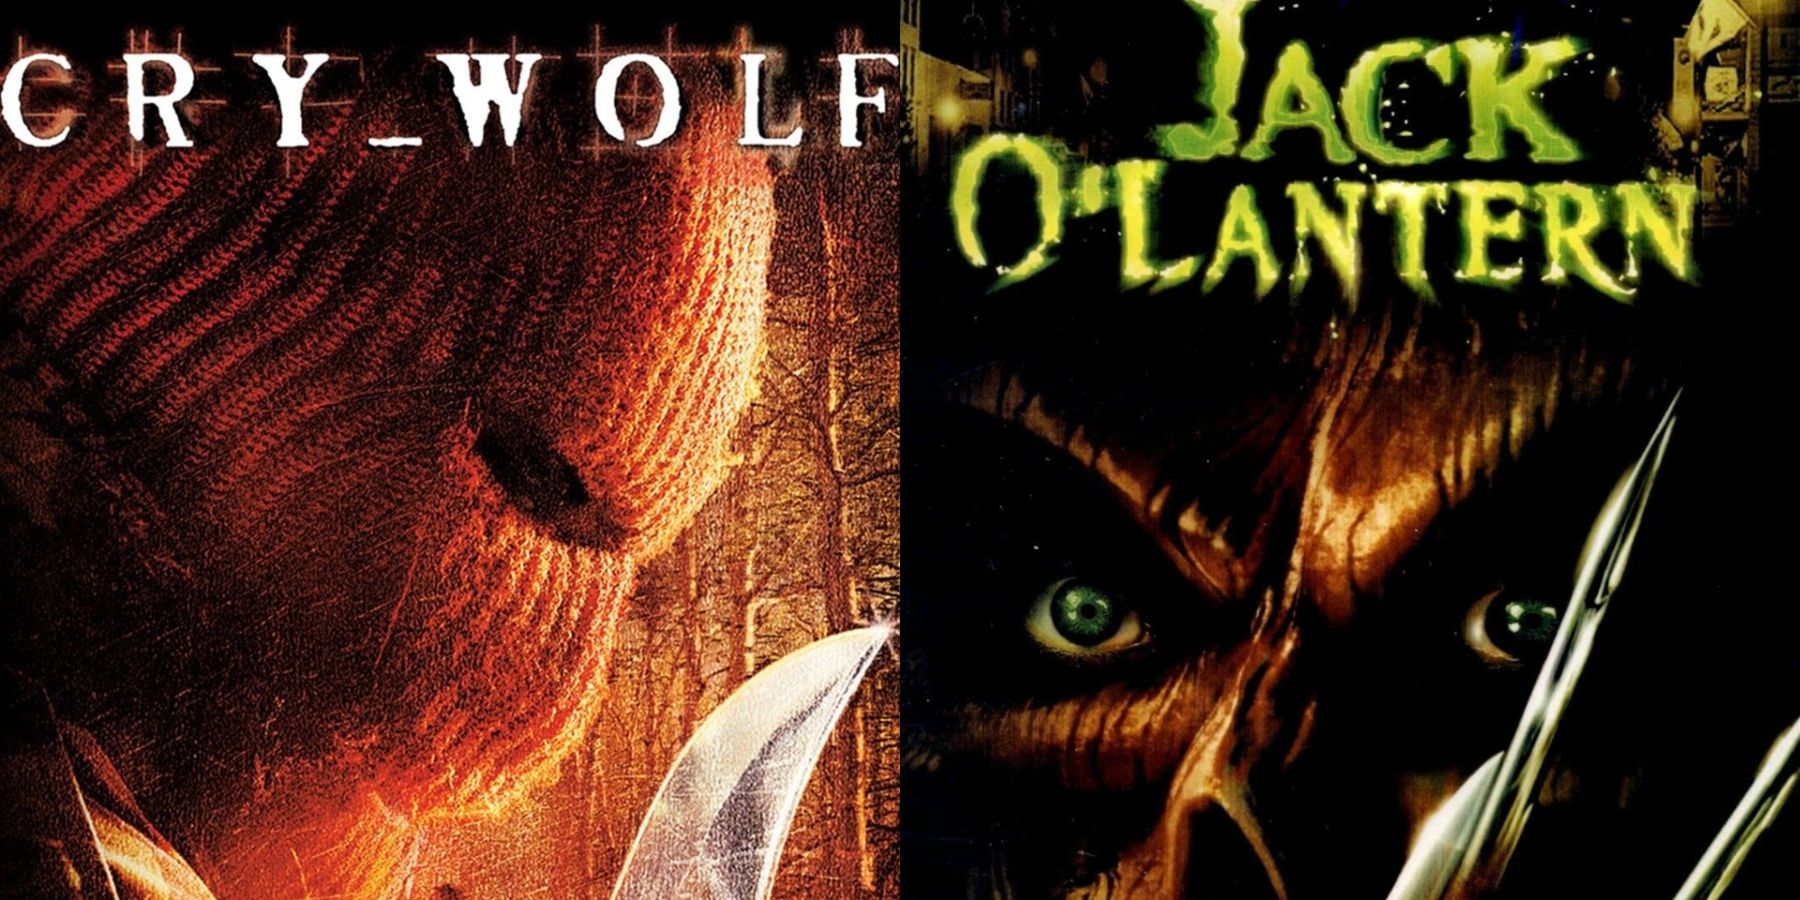 Split image of the movie posters for Cry Wolf and Jack O'Lantern